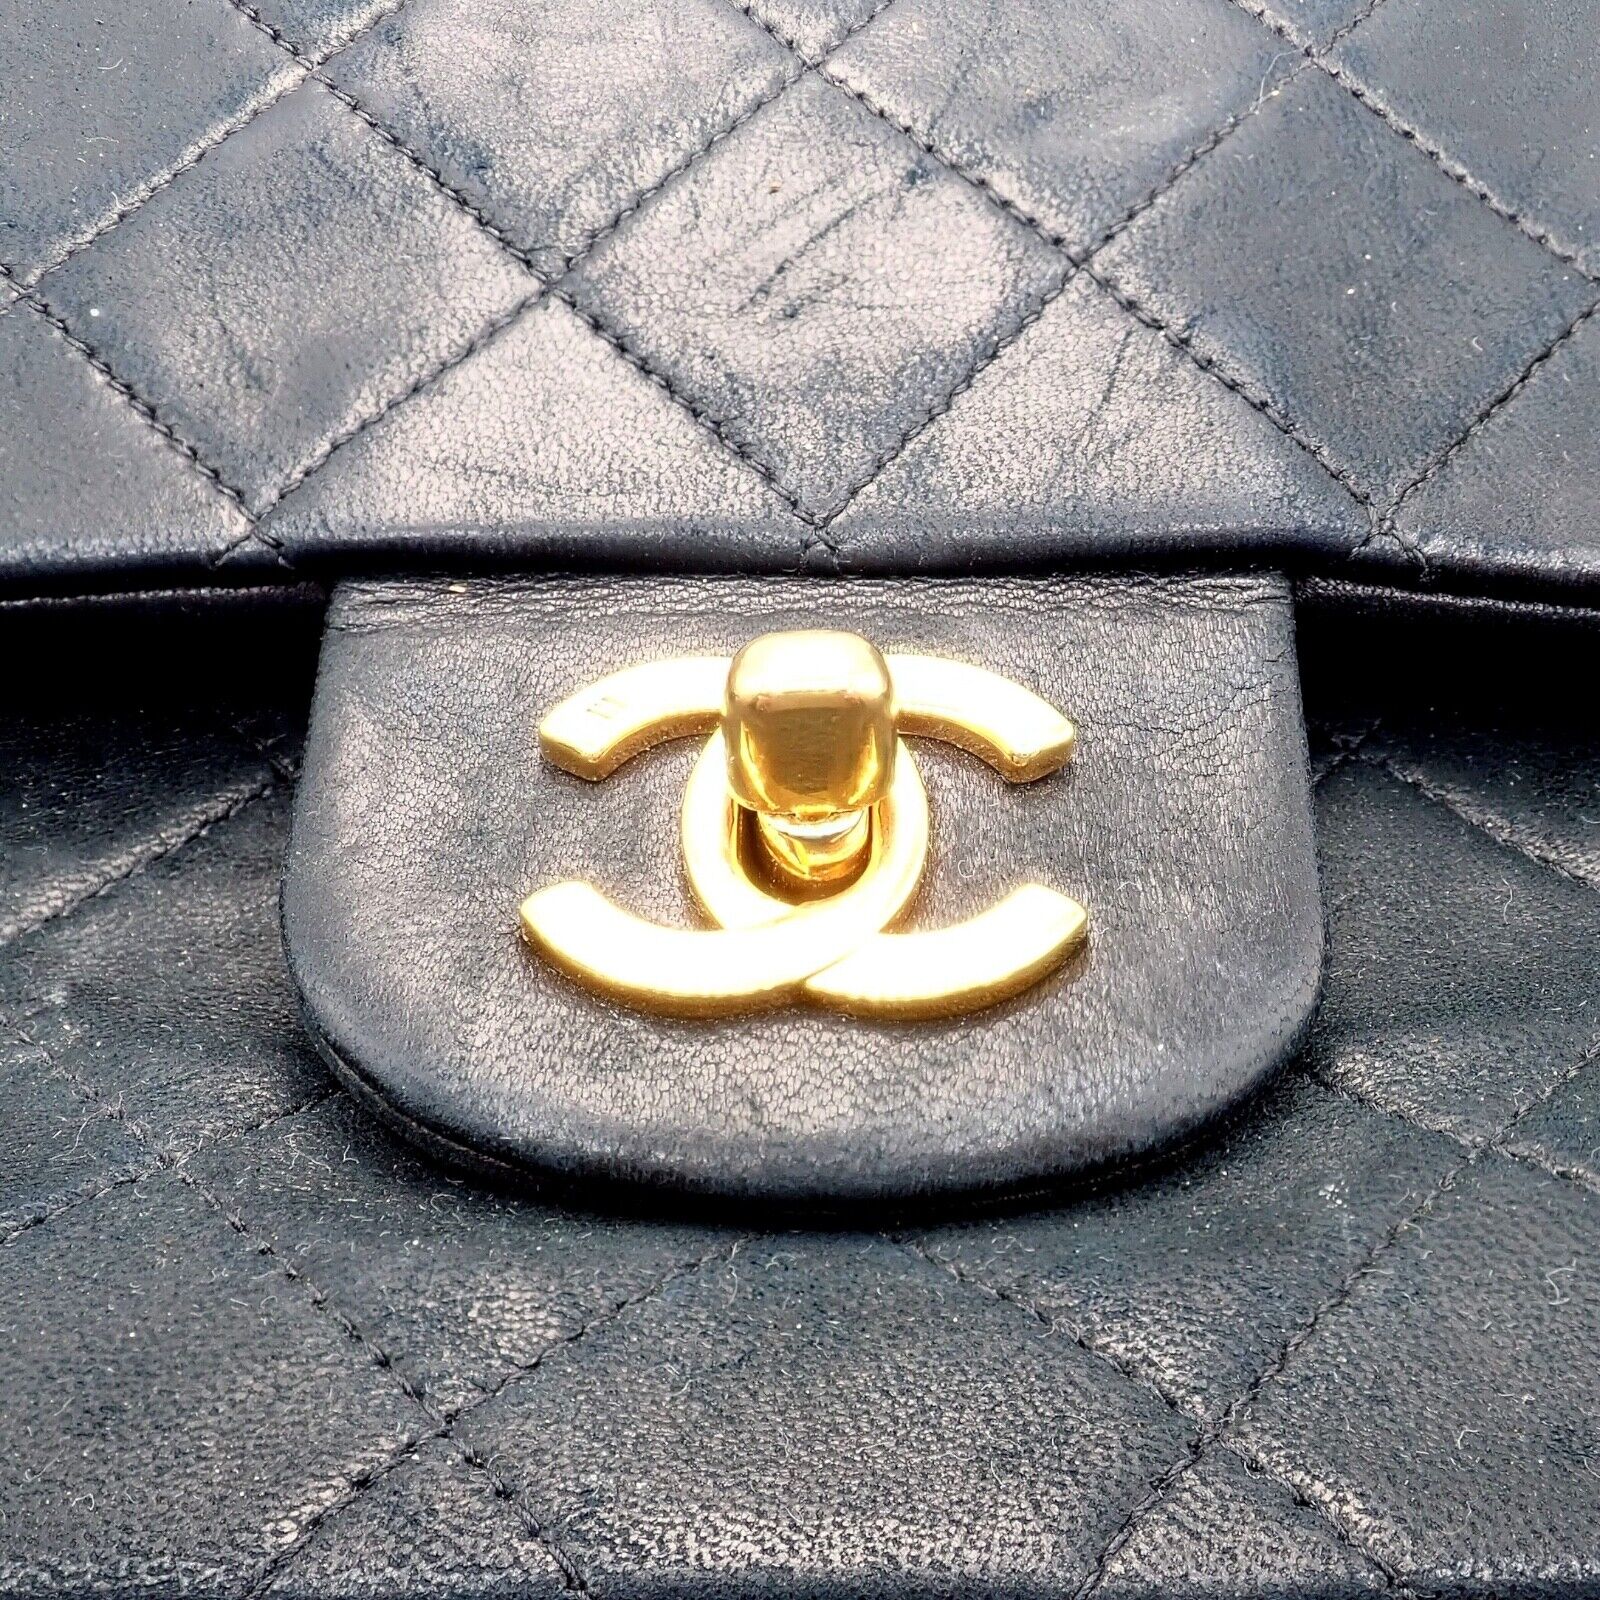 CHANEL Clothing, Shoes & Accessories:Women:Women's Bags & Handbags 1991 Chanel M Black Quilted Lambskin Double Flap Rare Red Interior Handbag Purse